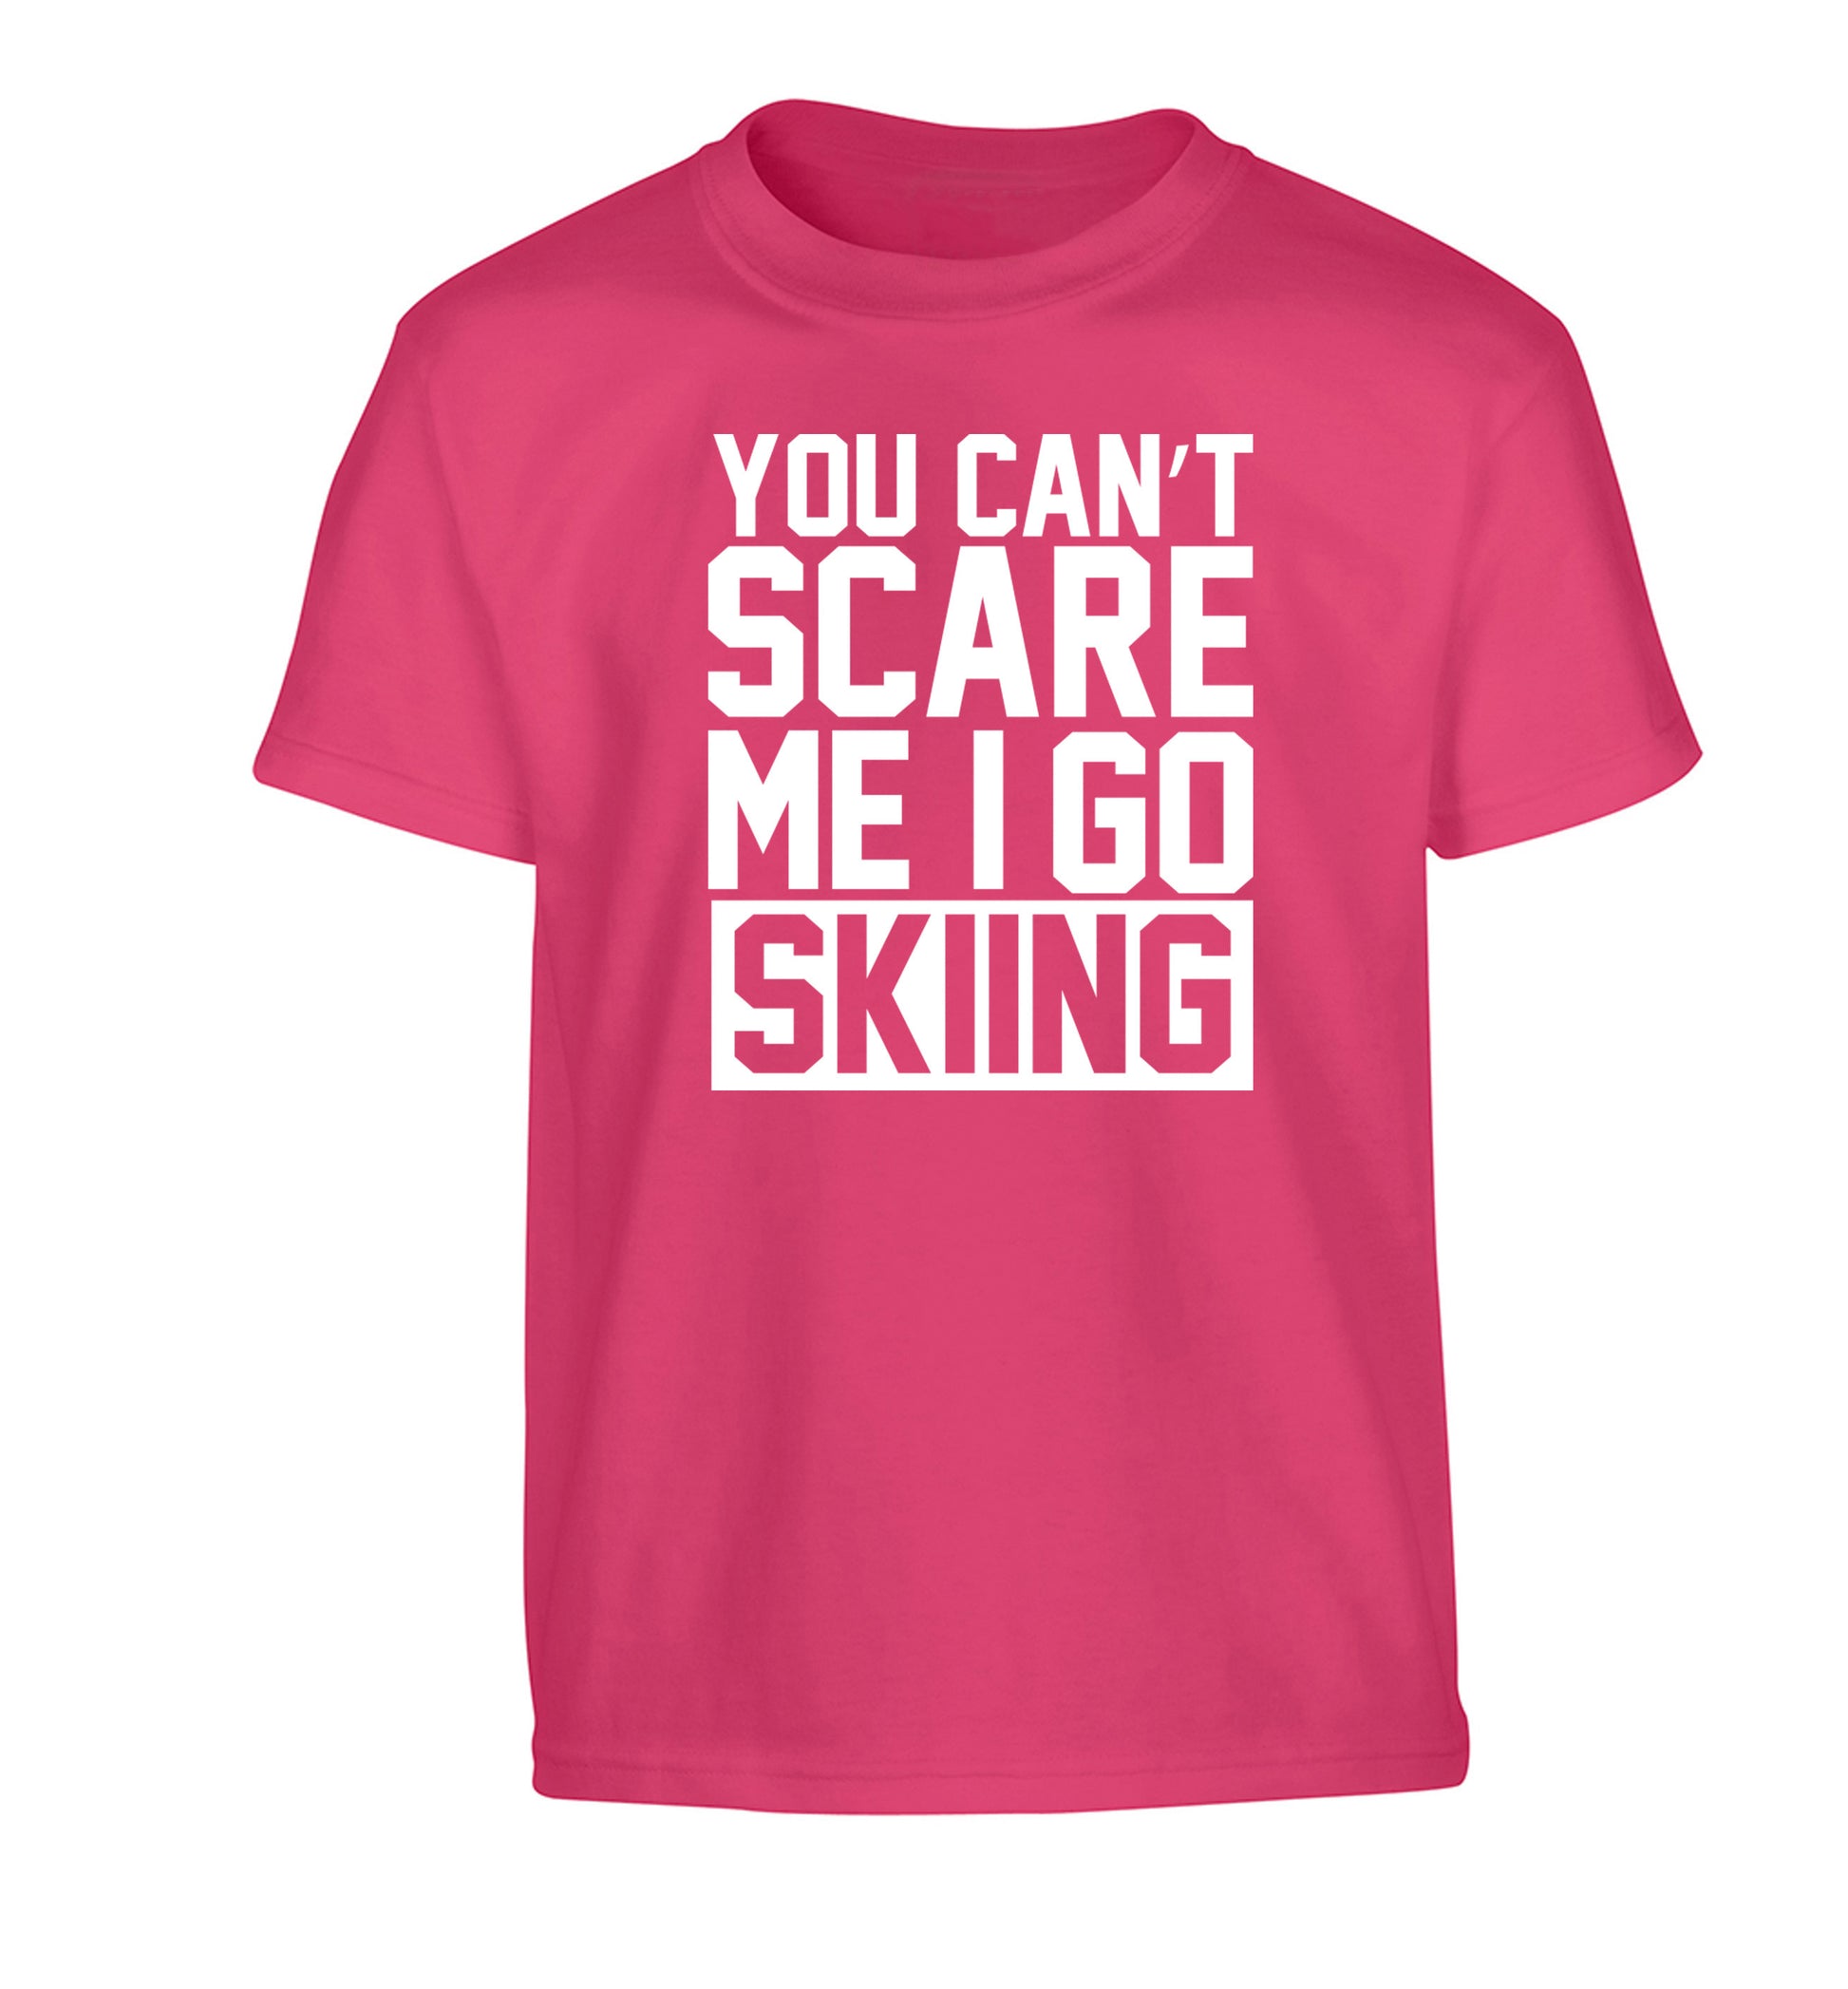 You can't scare me I go skiing Children's pink Tshirt 12-14 Years